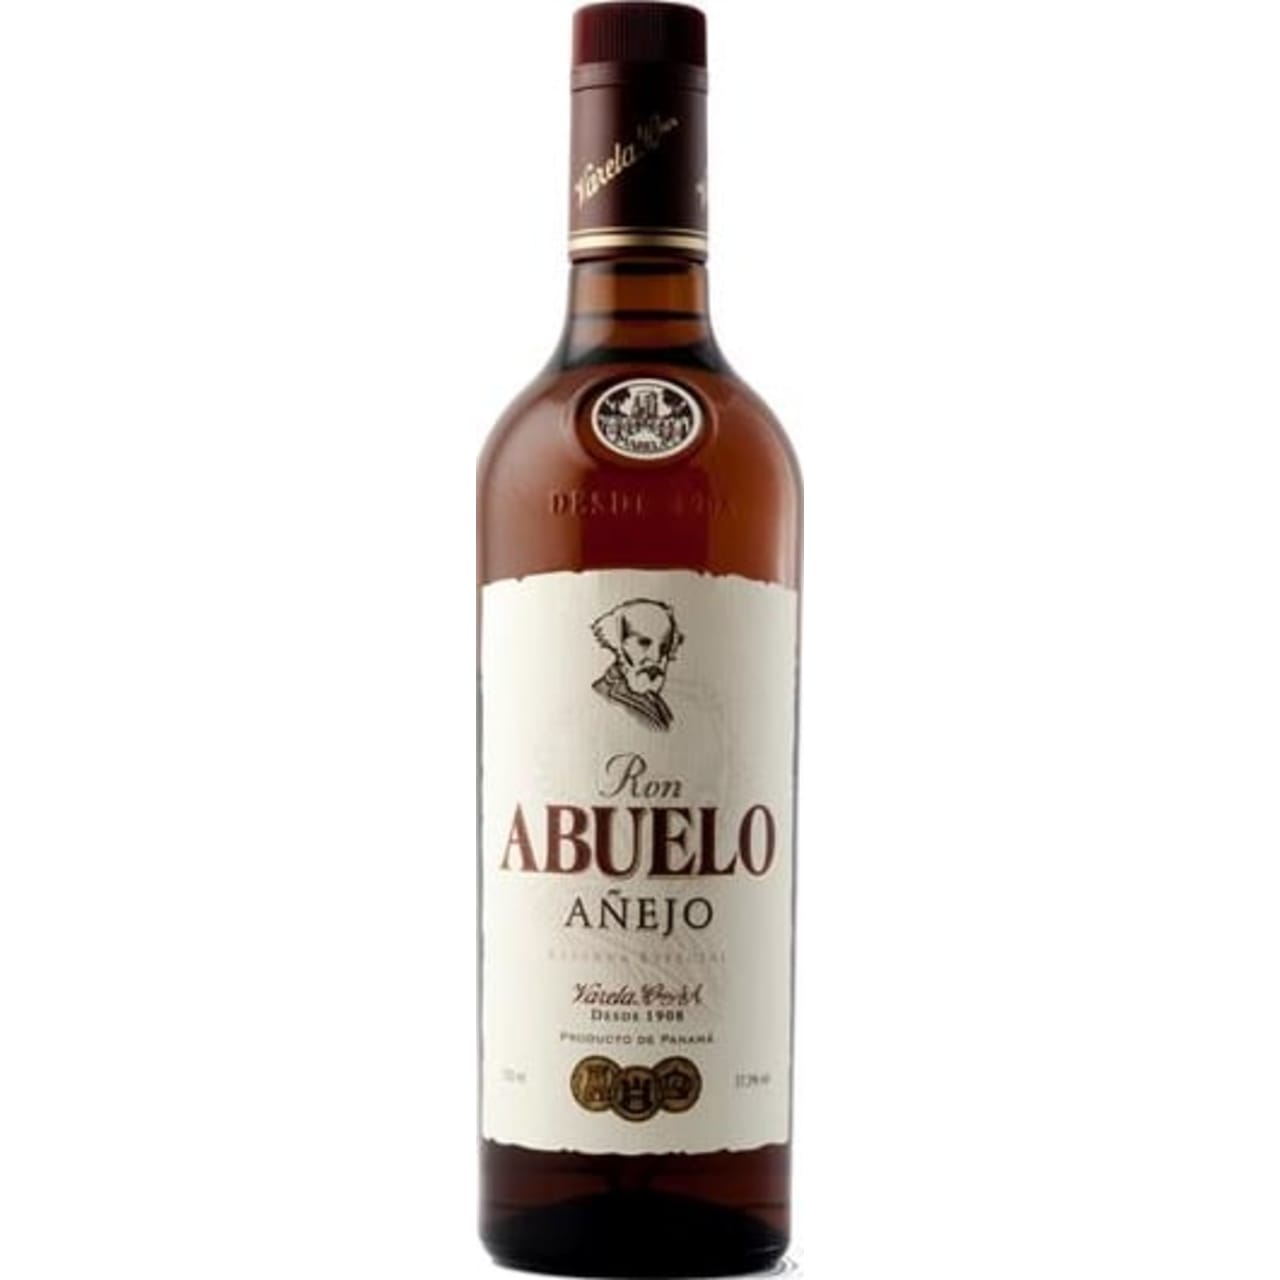 A 5 year old Panamanian rum from Ron Abuelo. It is made at Varela-Hermanos, which is a third generation family distillery that grows its own sugar cane and ages its rum in white oak barrels.